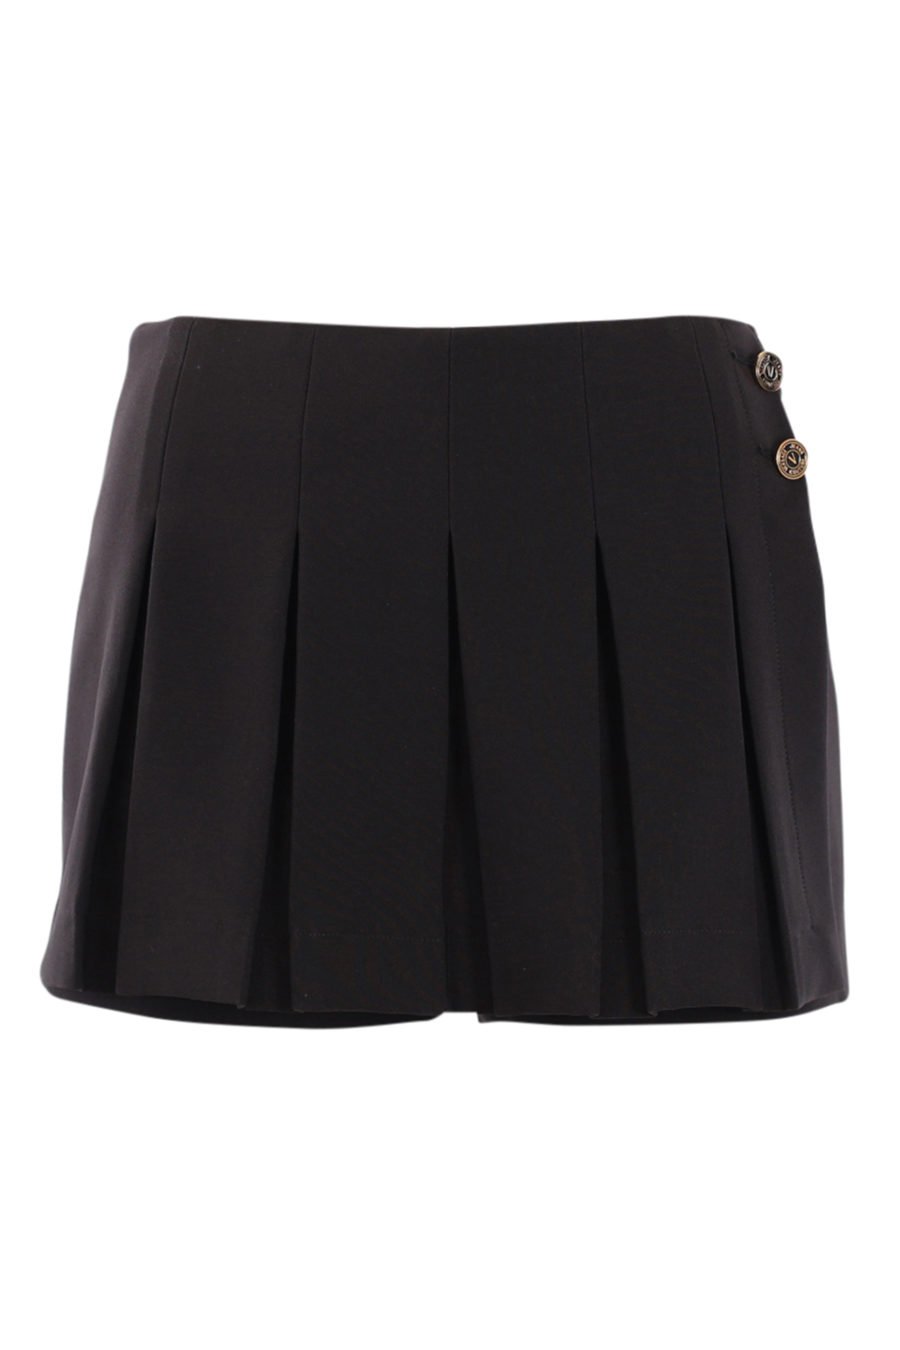 Black pleated shorts with gold buttons - IMG 0582